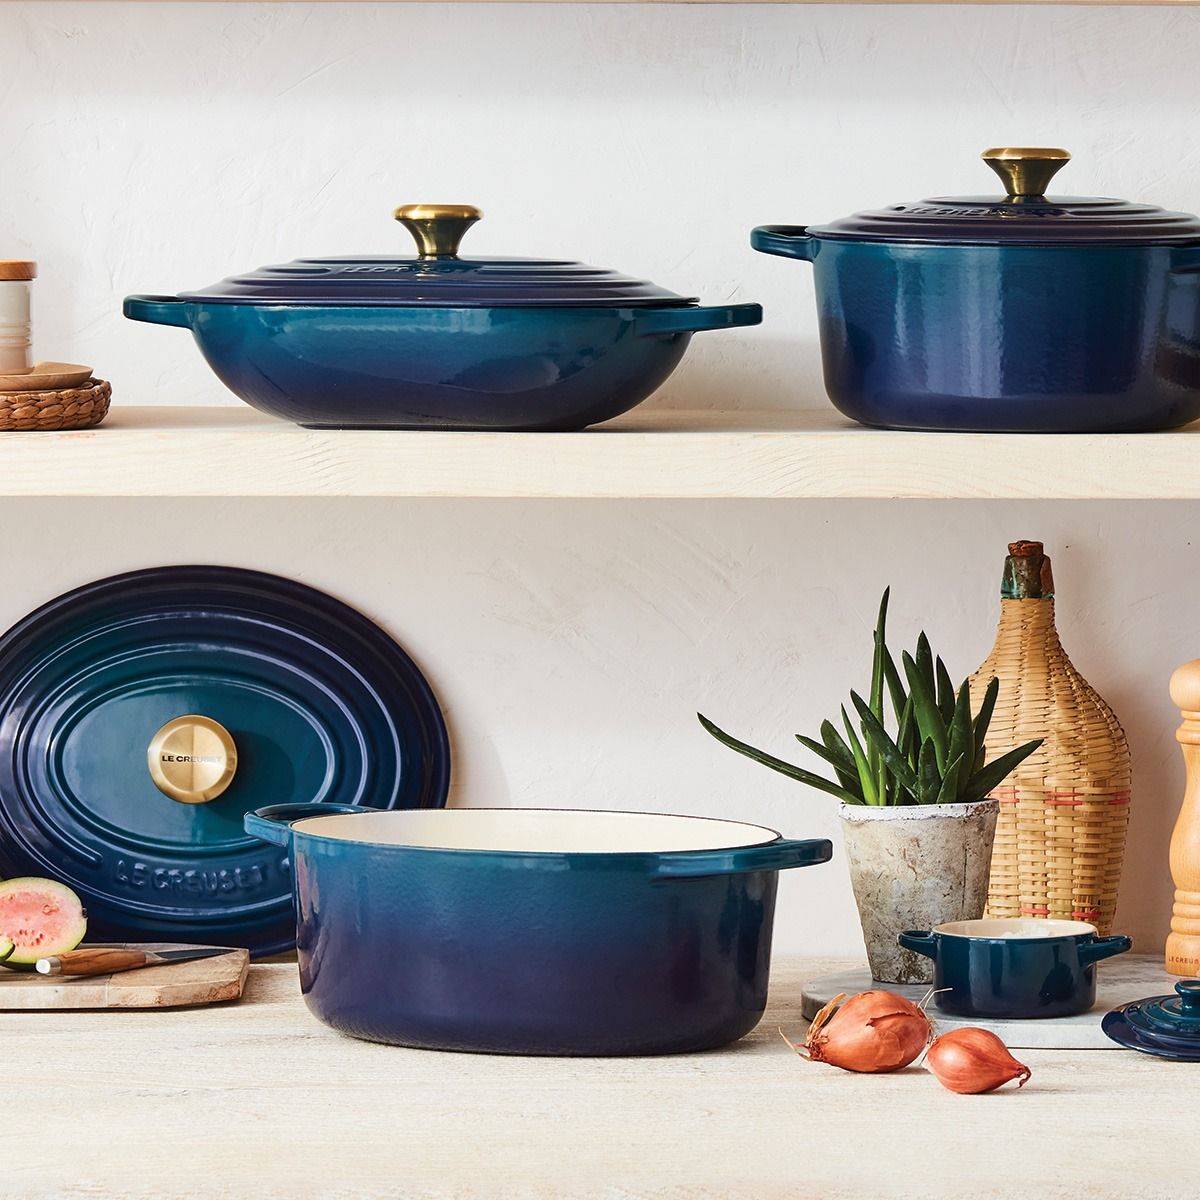 le creuset cookware in agave, a rich green blue color